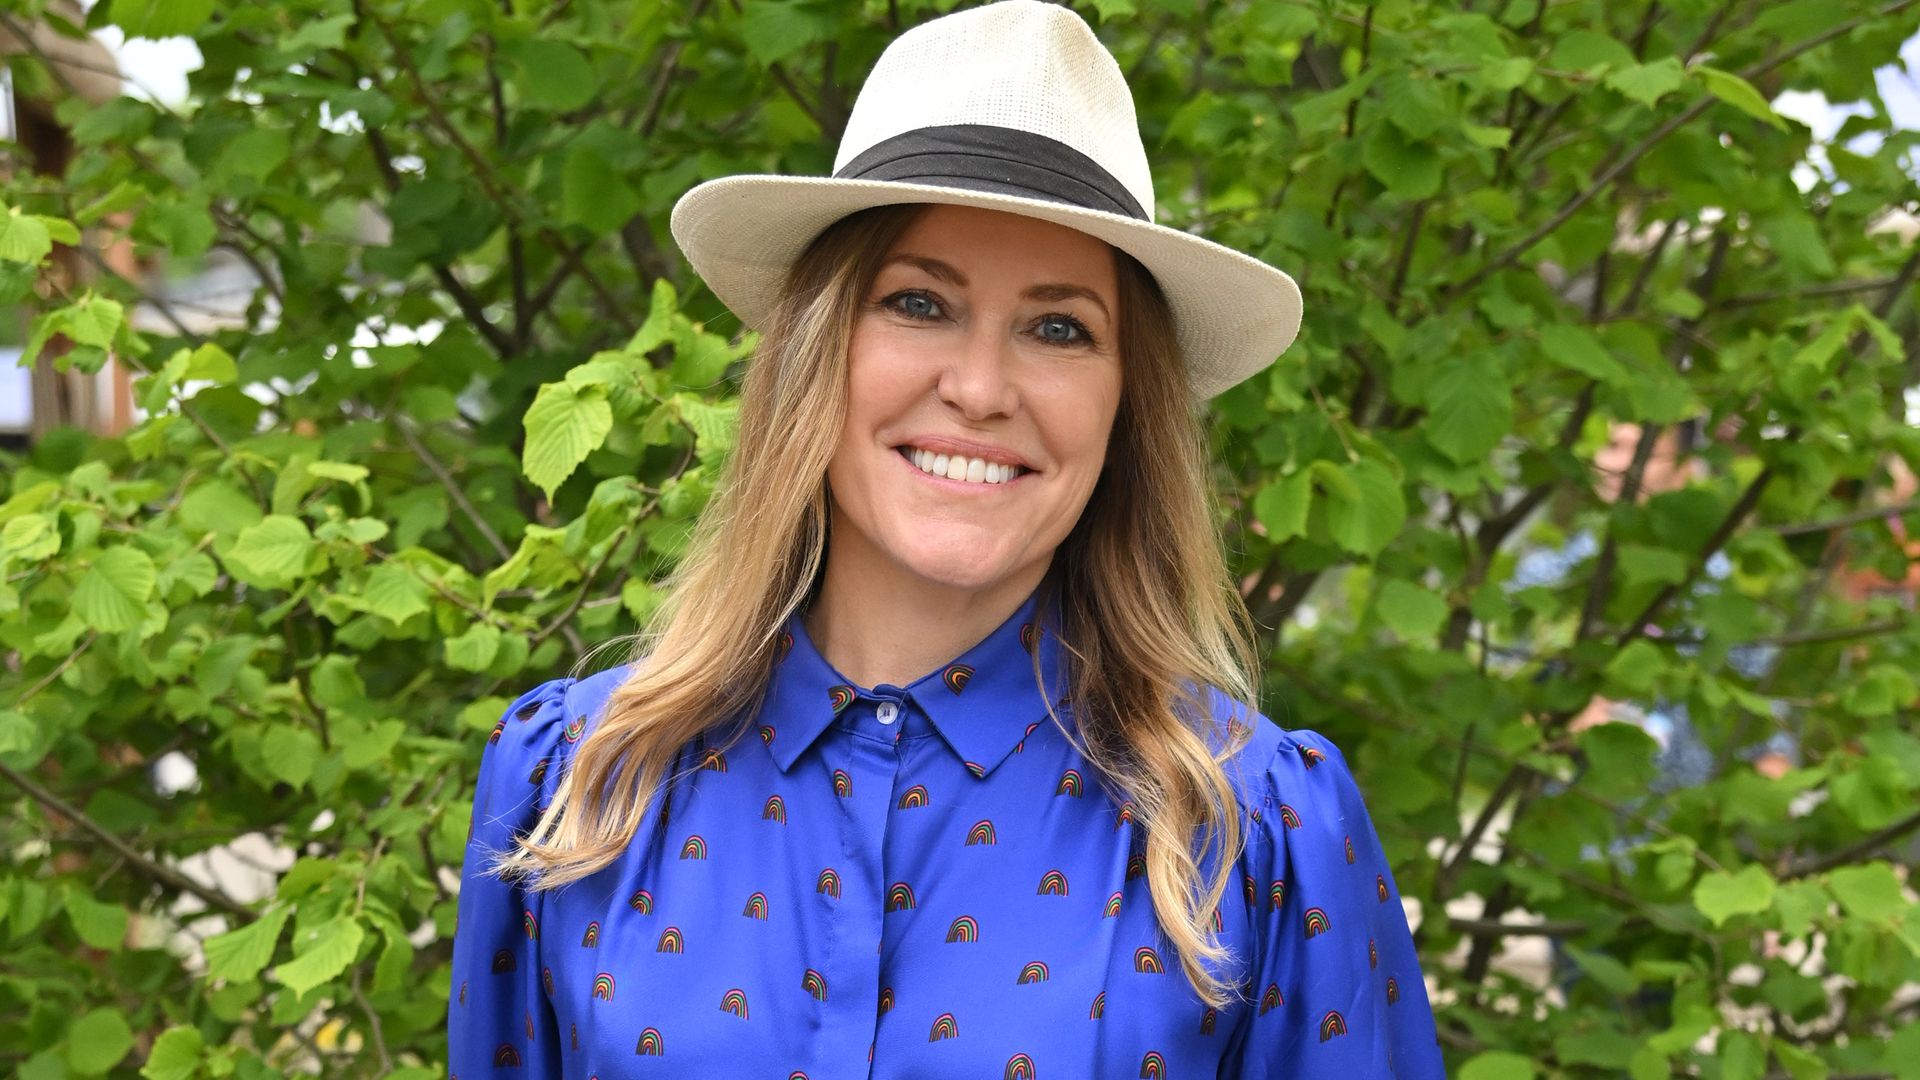 Cerys Matthews smiling while attending the Chelsea Flower Show on May 23, 2022 in London